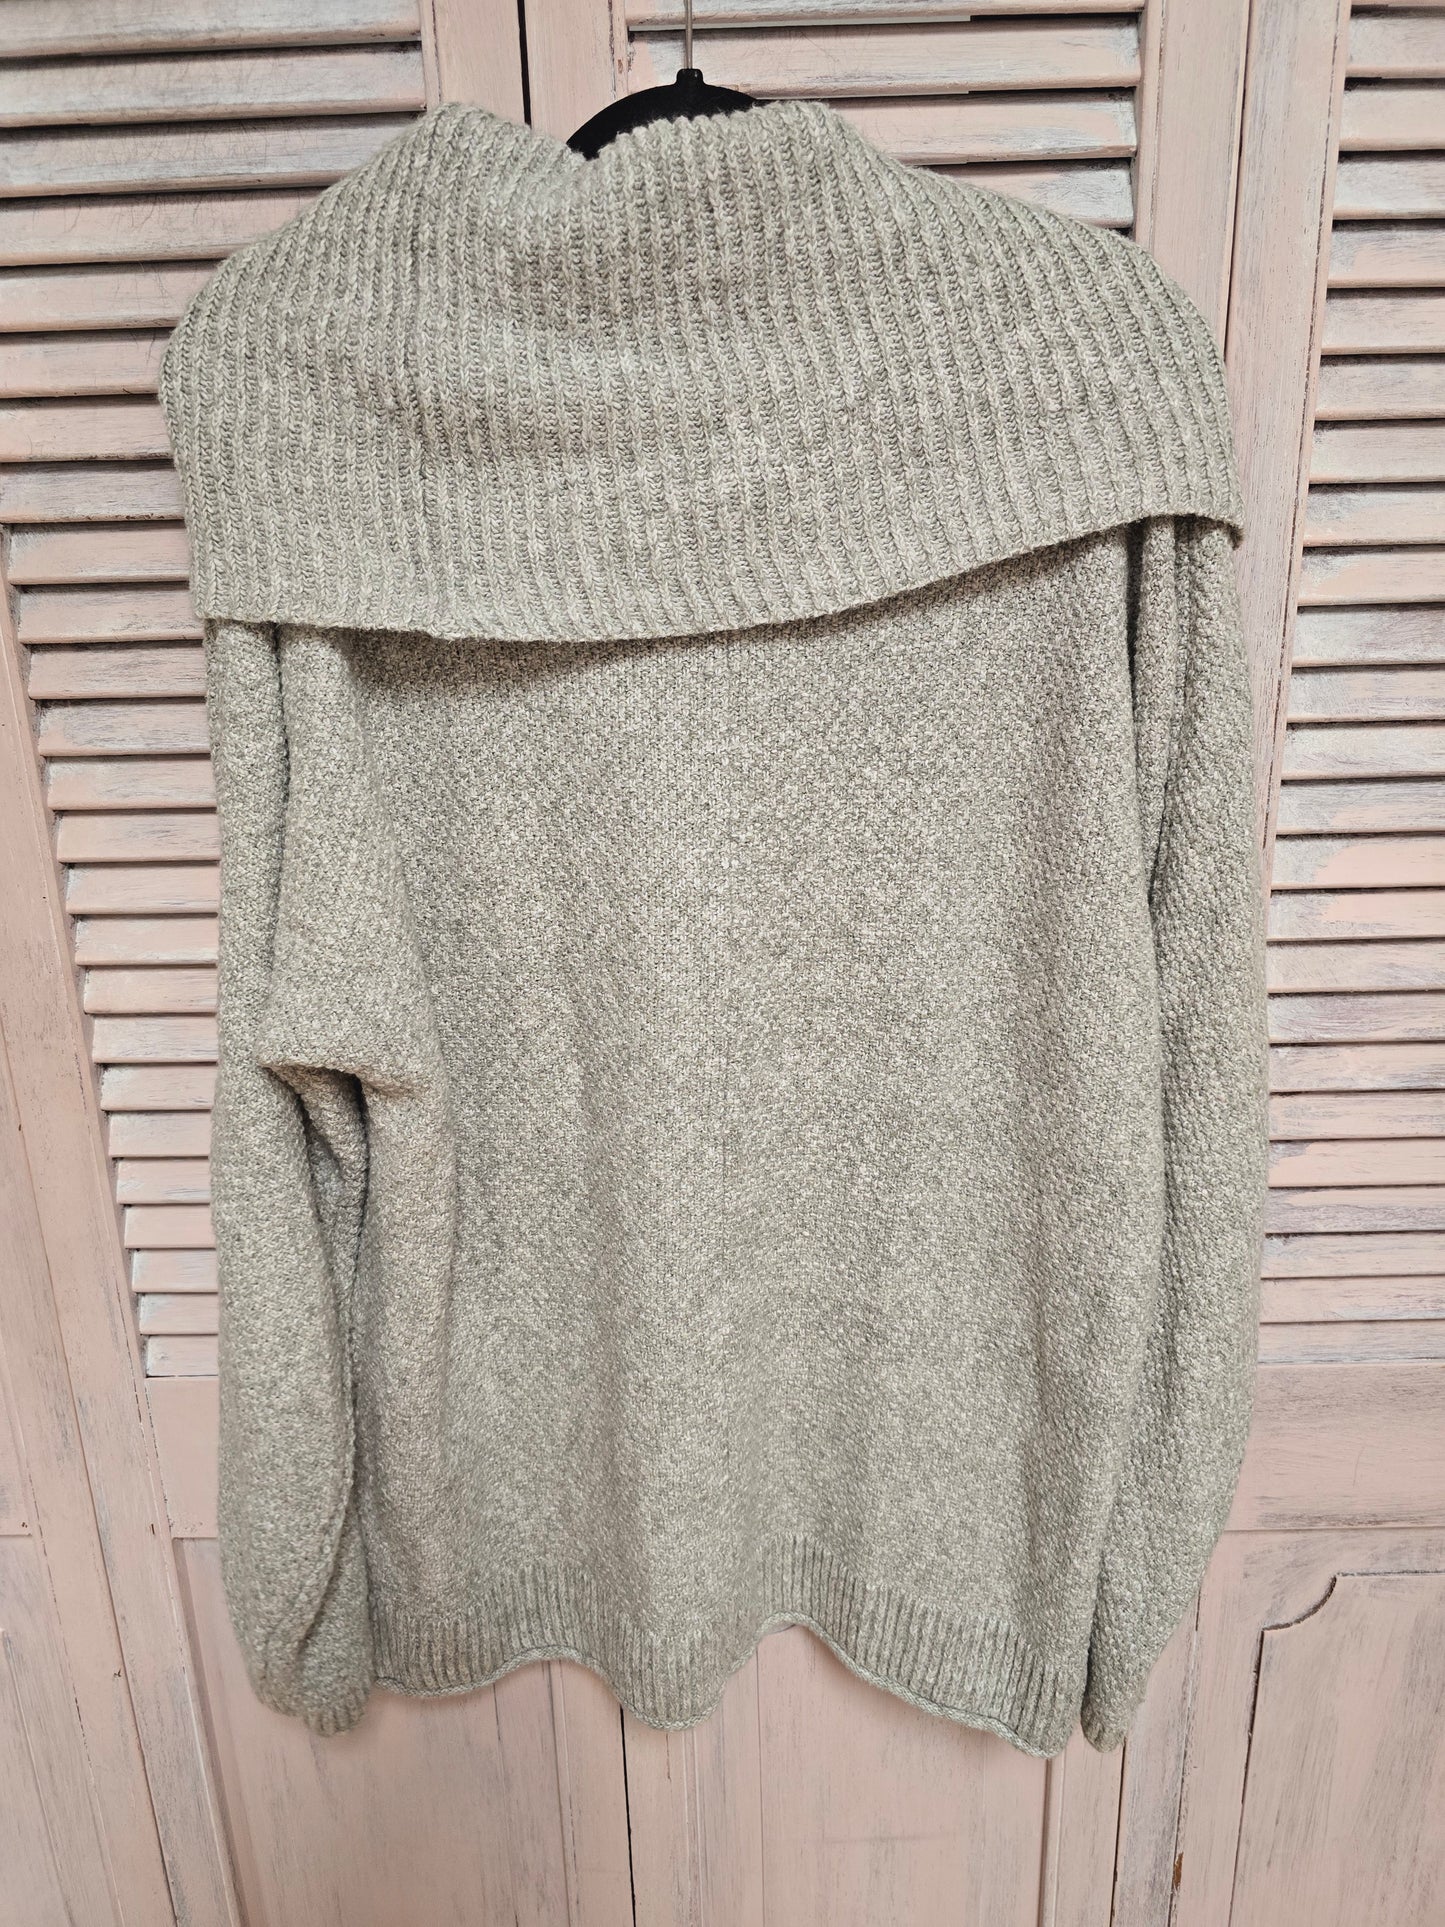 Maurices Cowlneck Sweater